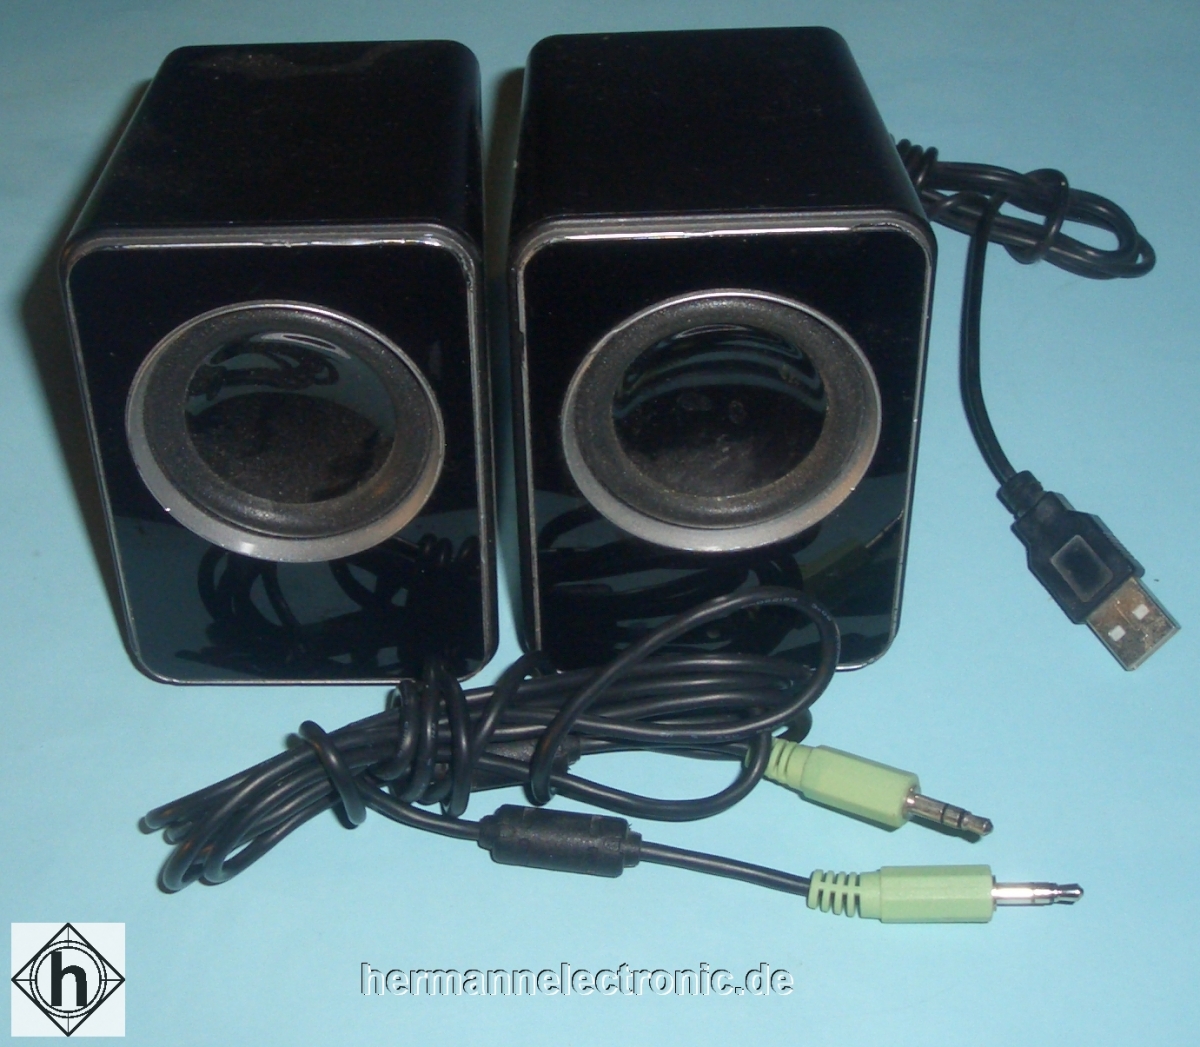 TCM1 pair of PC speakers TCM with 3.5mm stereo jack plug cable and mono jack cable used